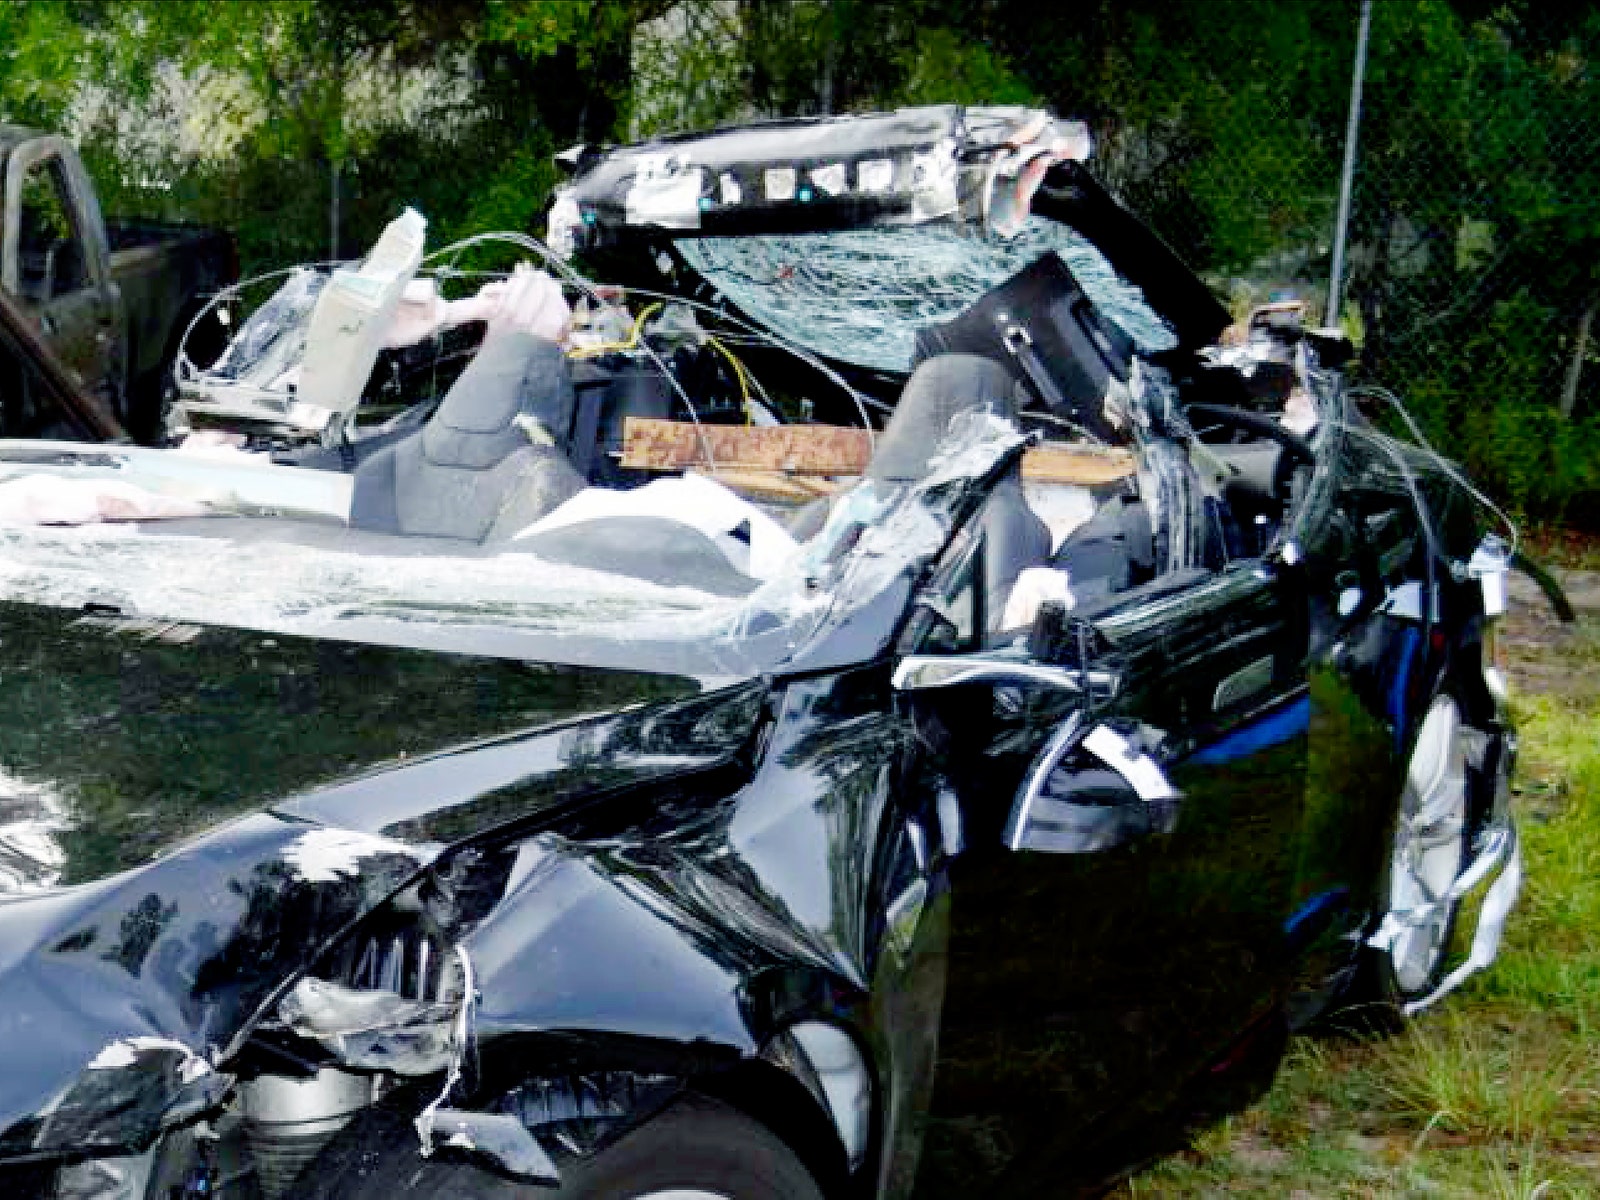 A Tesla Model S that crashed while in self driving mode which resulted in the death of Joshua Brown on May 7 2016.